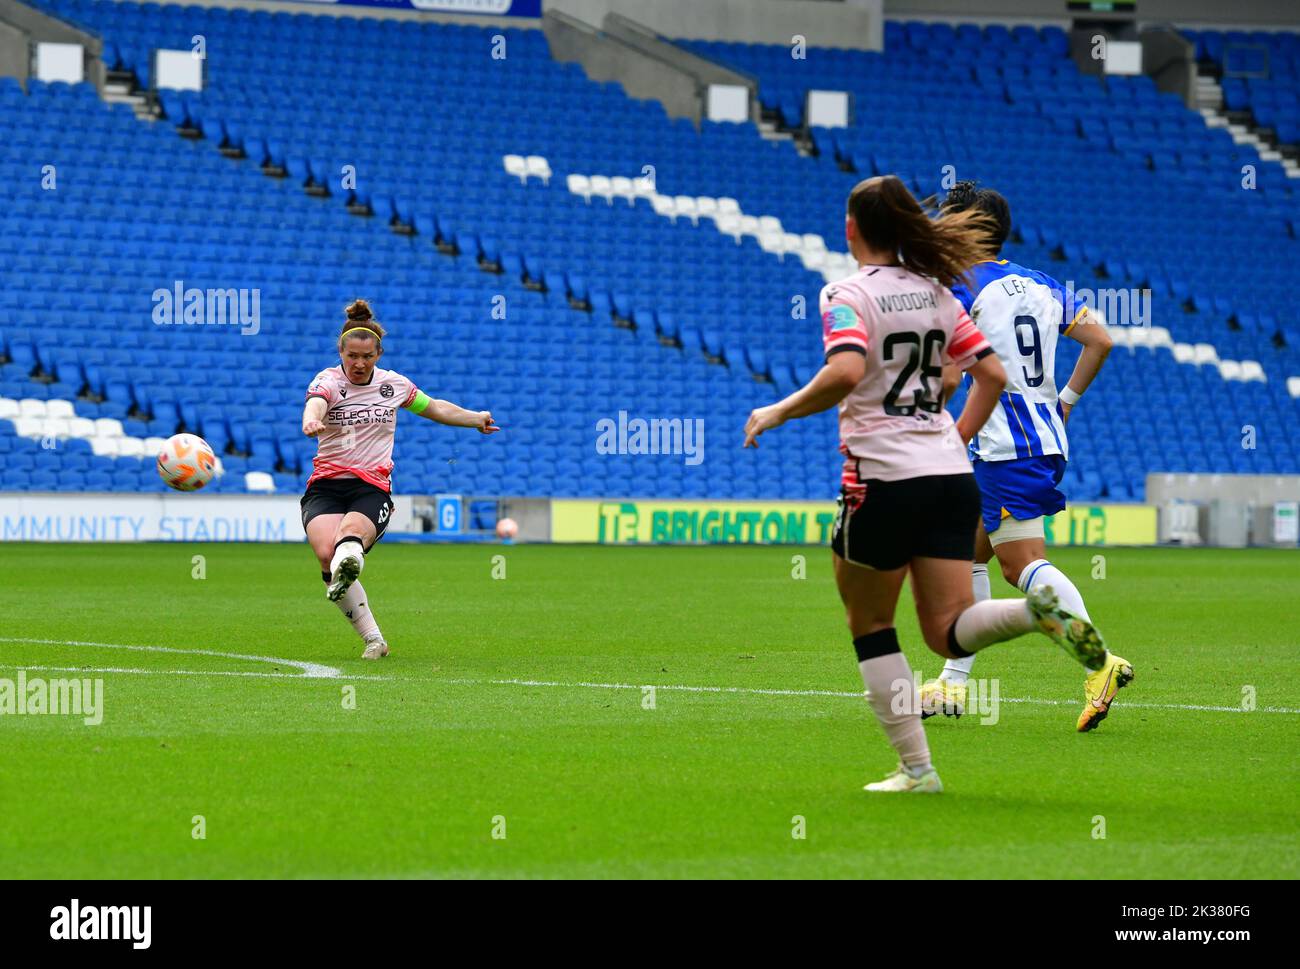 Brighton And Hove, UK. 25th Sep, 2022. Emma Mukandi of Reading takes a shot on goal during the FA Women's Super League match between Brighton & Hove Albion Women and Reading Women at American Express Community Stadium on September 25th 2022 in Brighton and Hove, United Kingdom. (Photo by Jeff Mood/phcimages.com) Credit: PHC Images/Alamy Live News Stock Photo